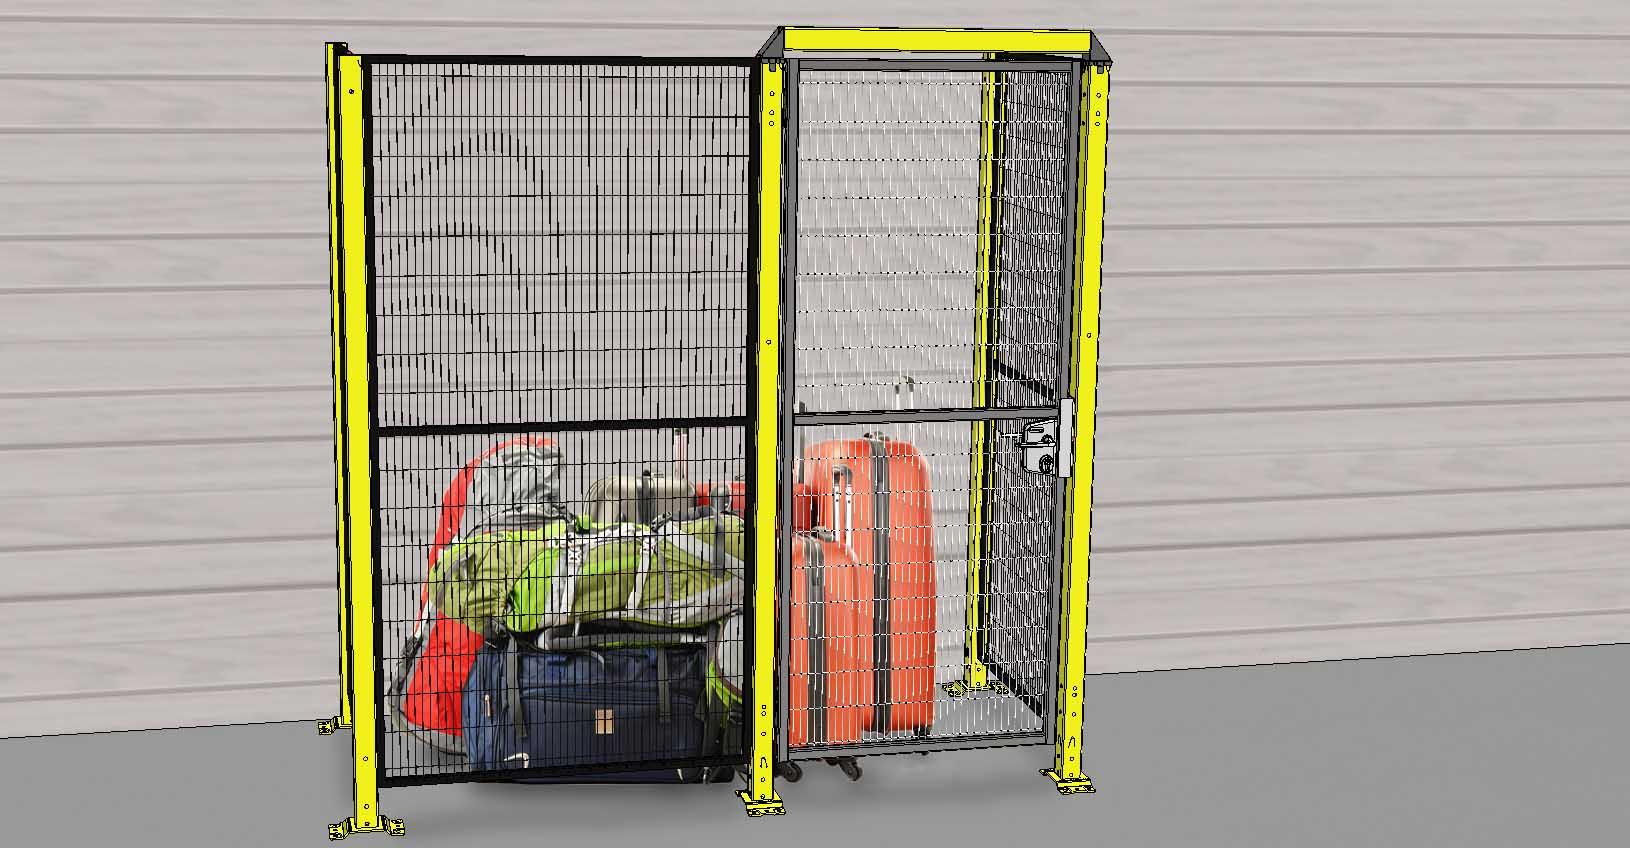 UK Suppliers of Asset Protection Cages